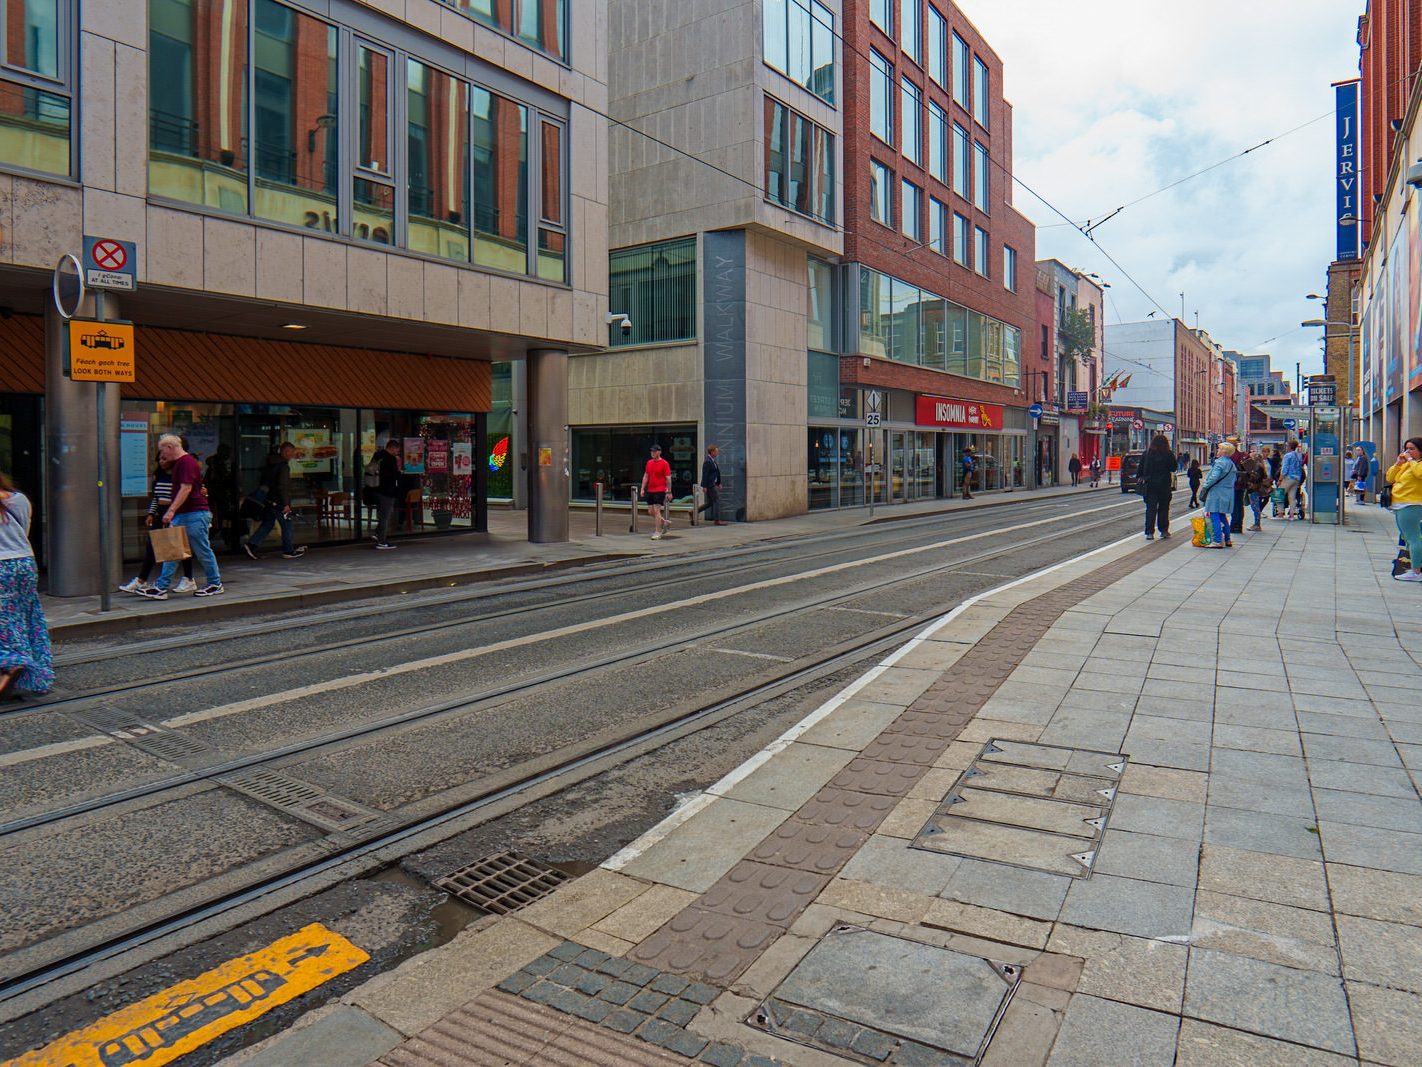 THE LUAS TRAM STOP [KNOWN AS JERVIS EVEN THOUGH IT IS ON UPPER ABBEY STREET] 003